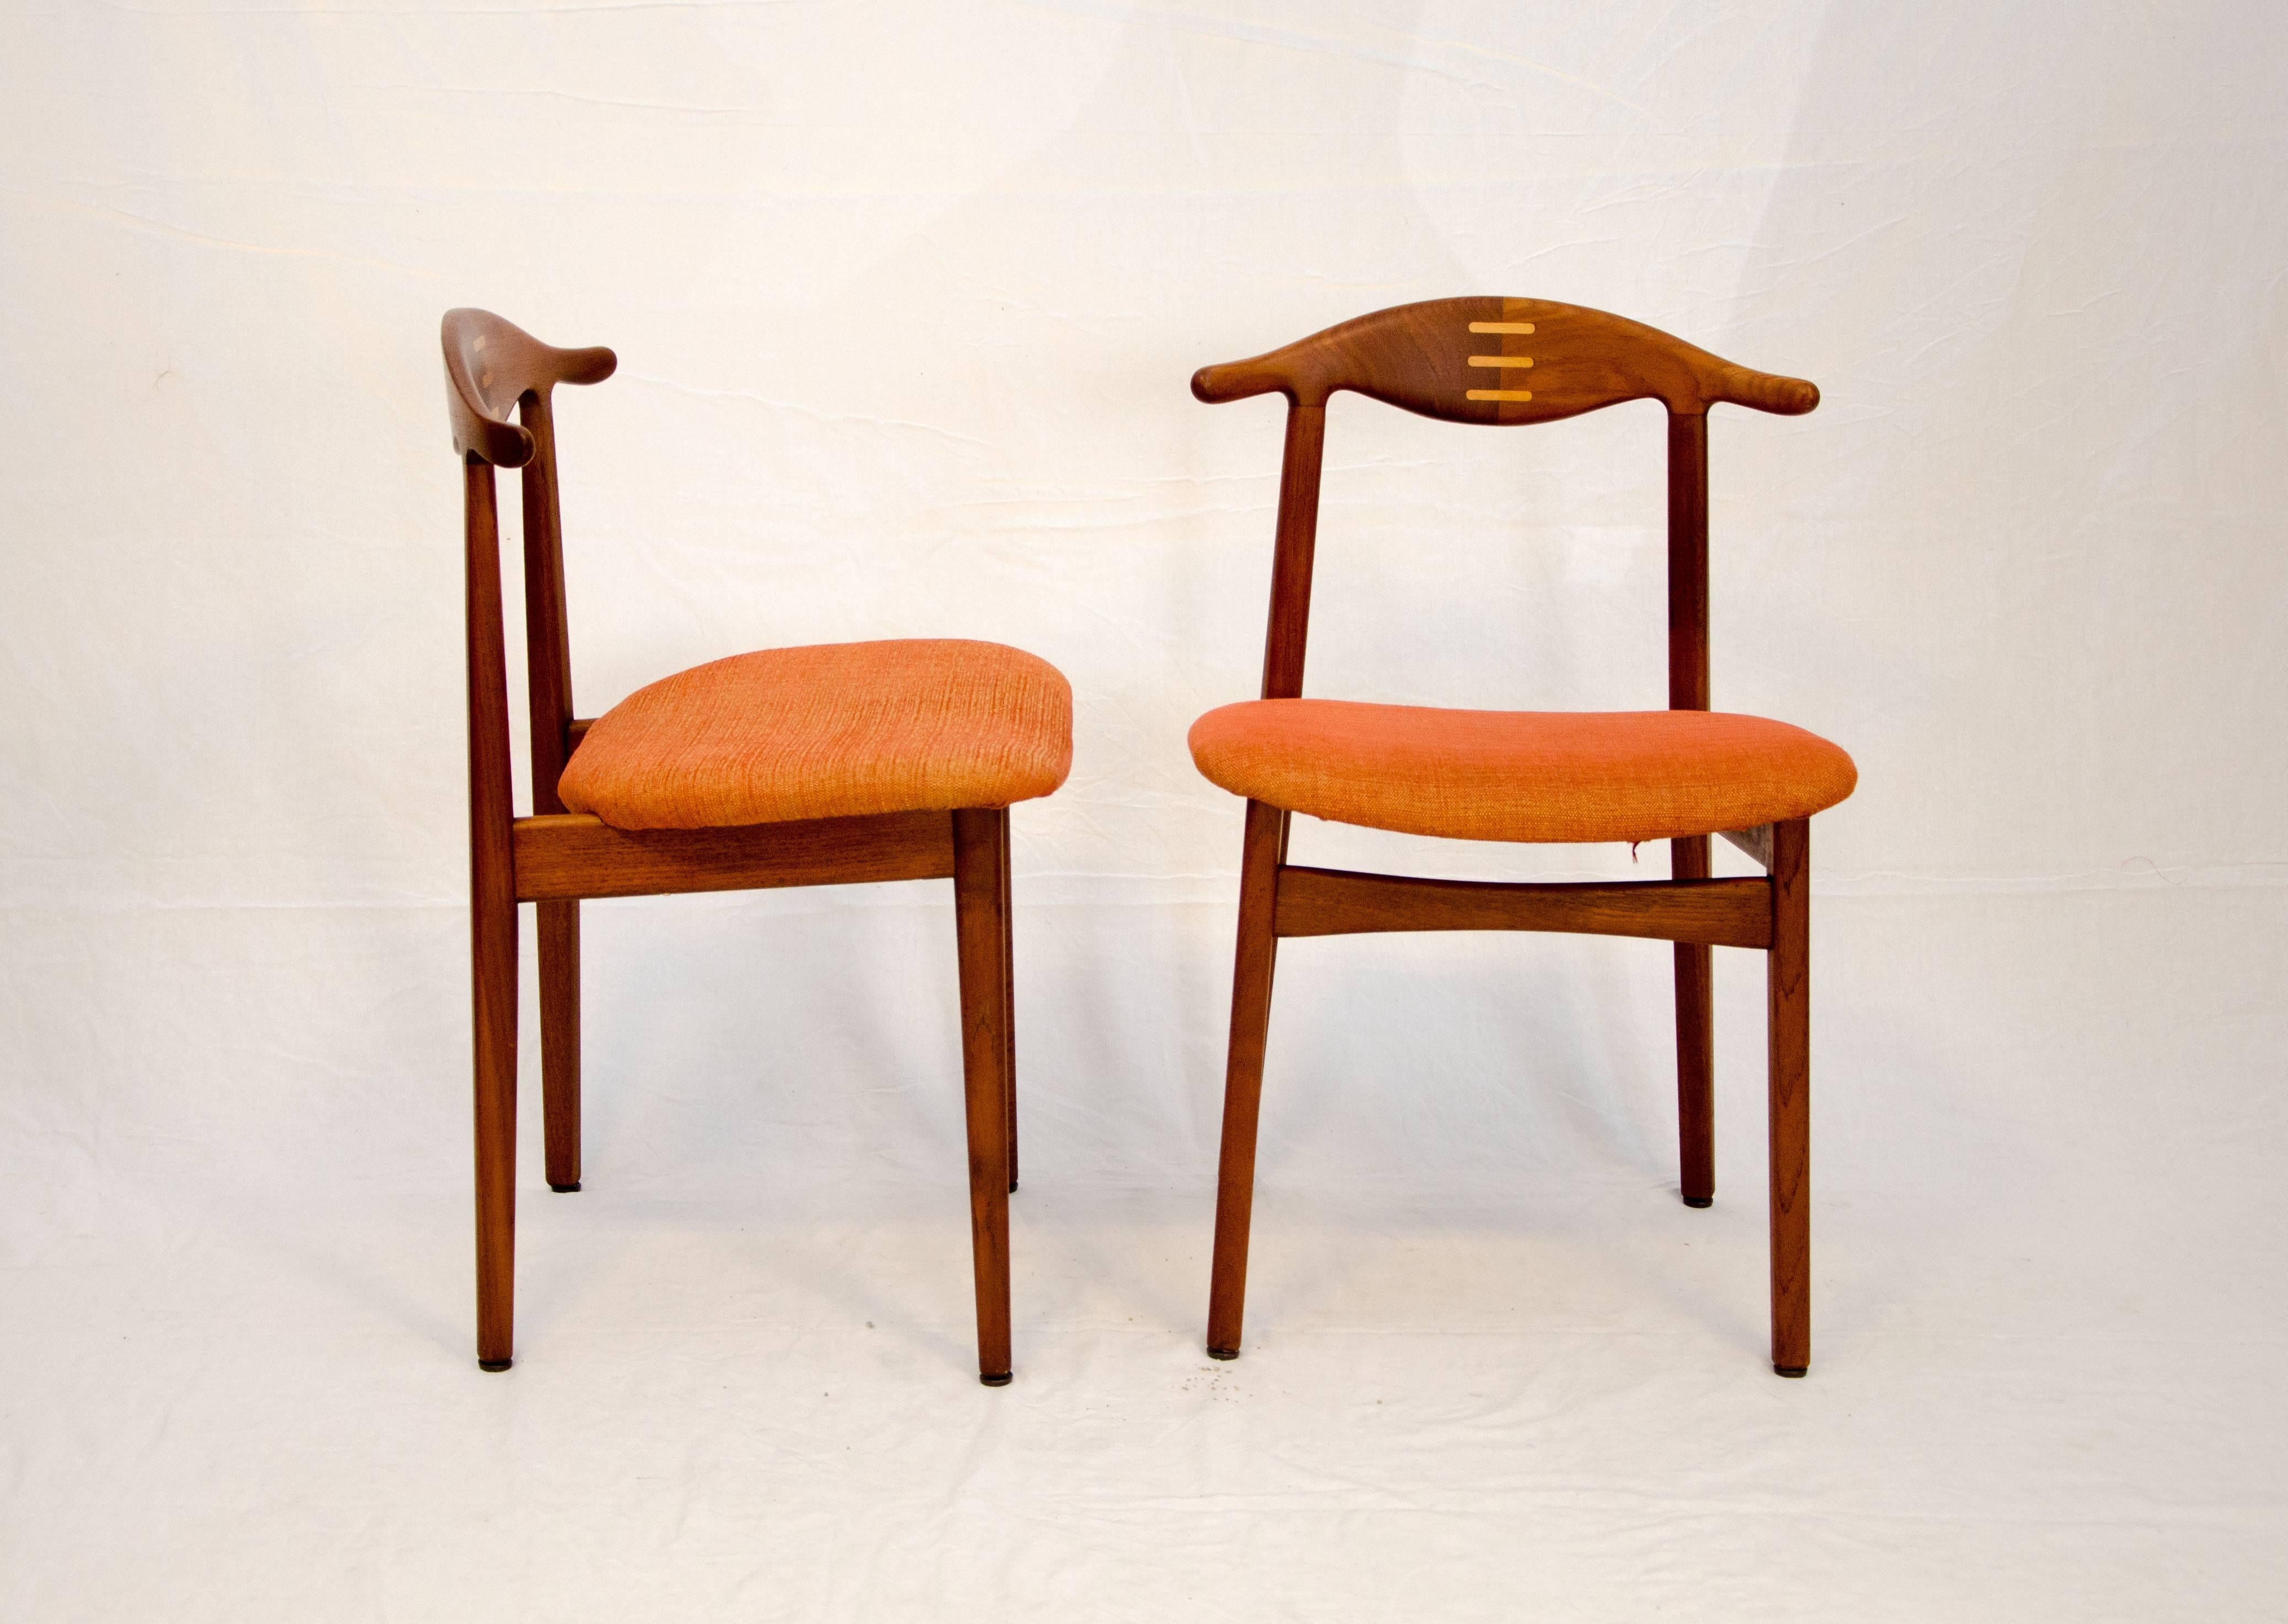 Rare Set of Four Teak Cowhorn Style Dining Chairs by Randers Stolefabrik 1